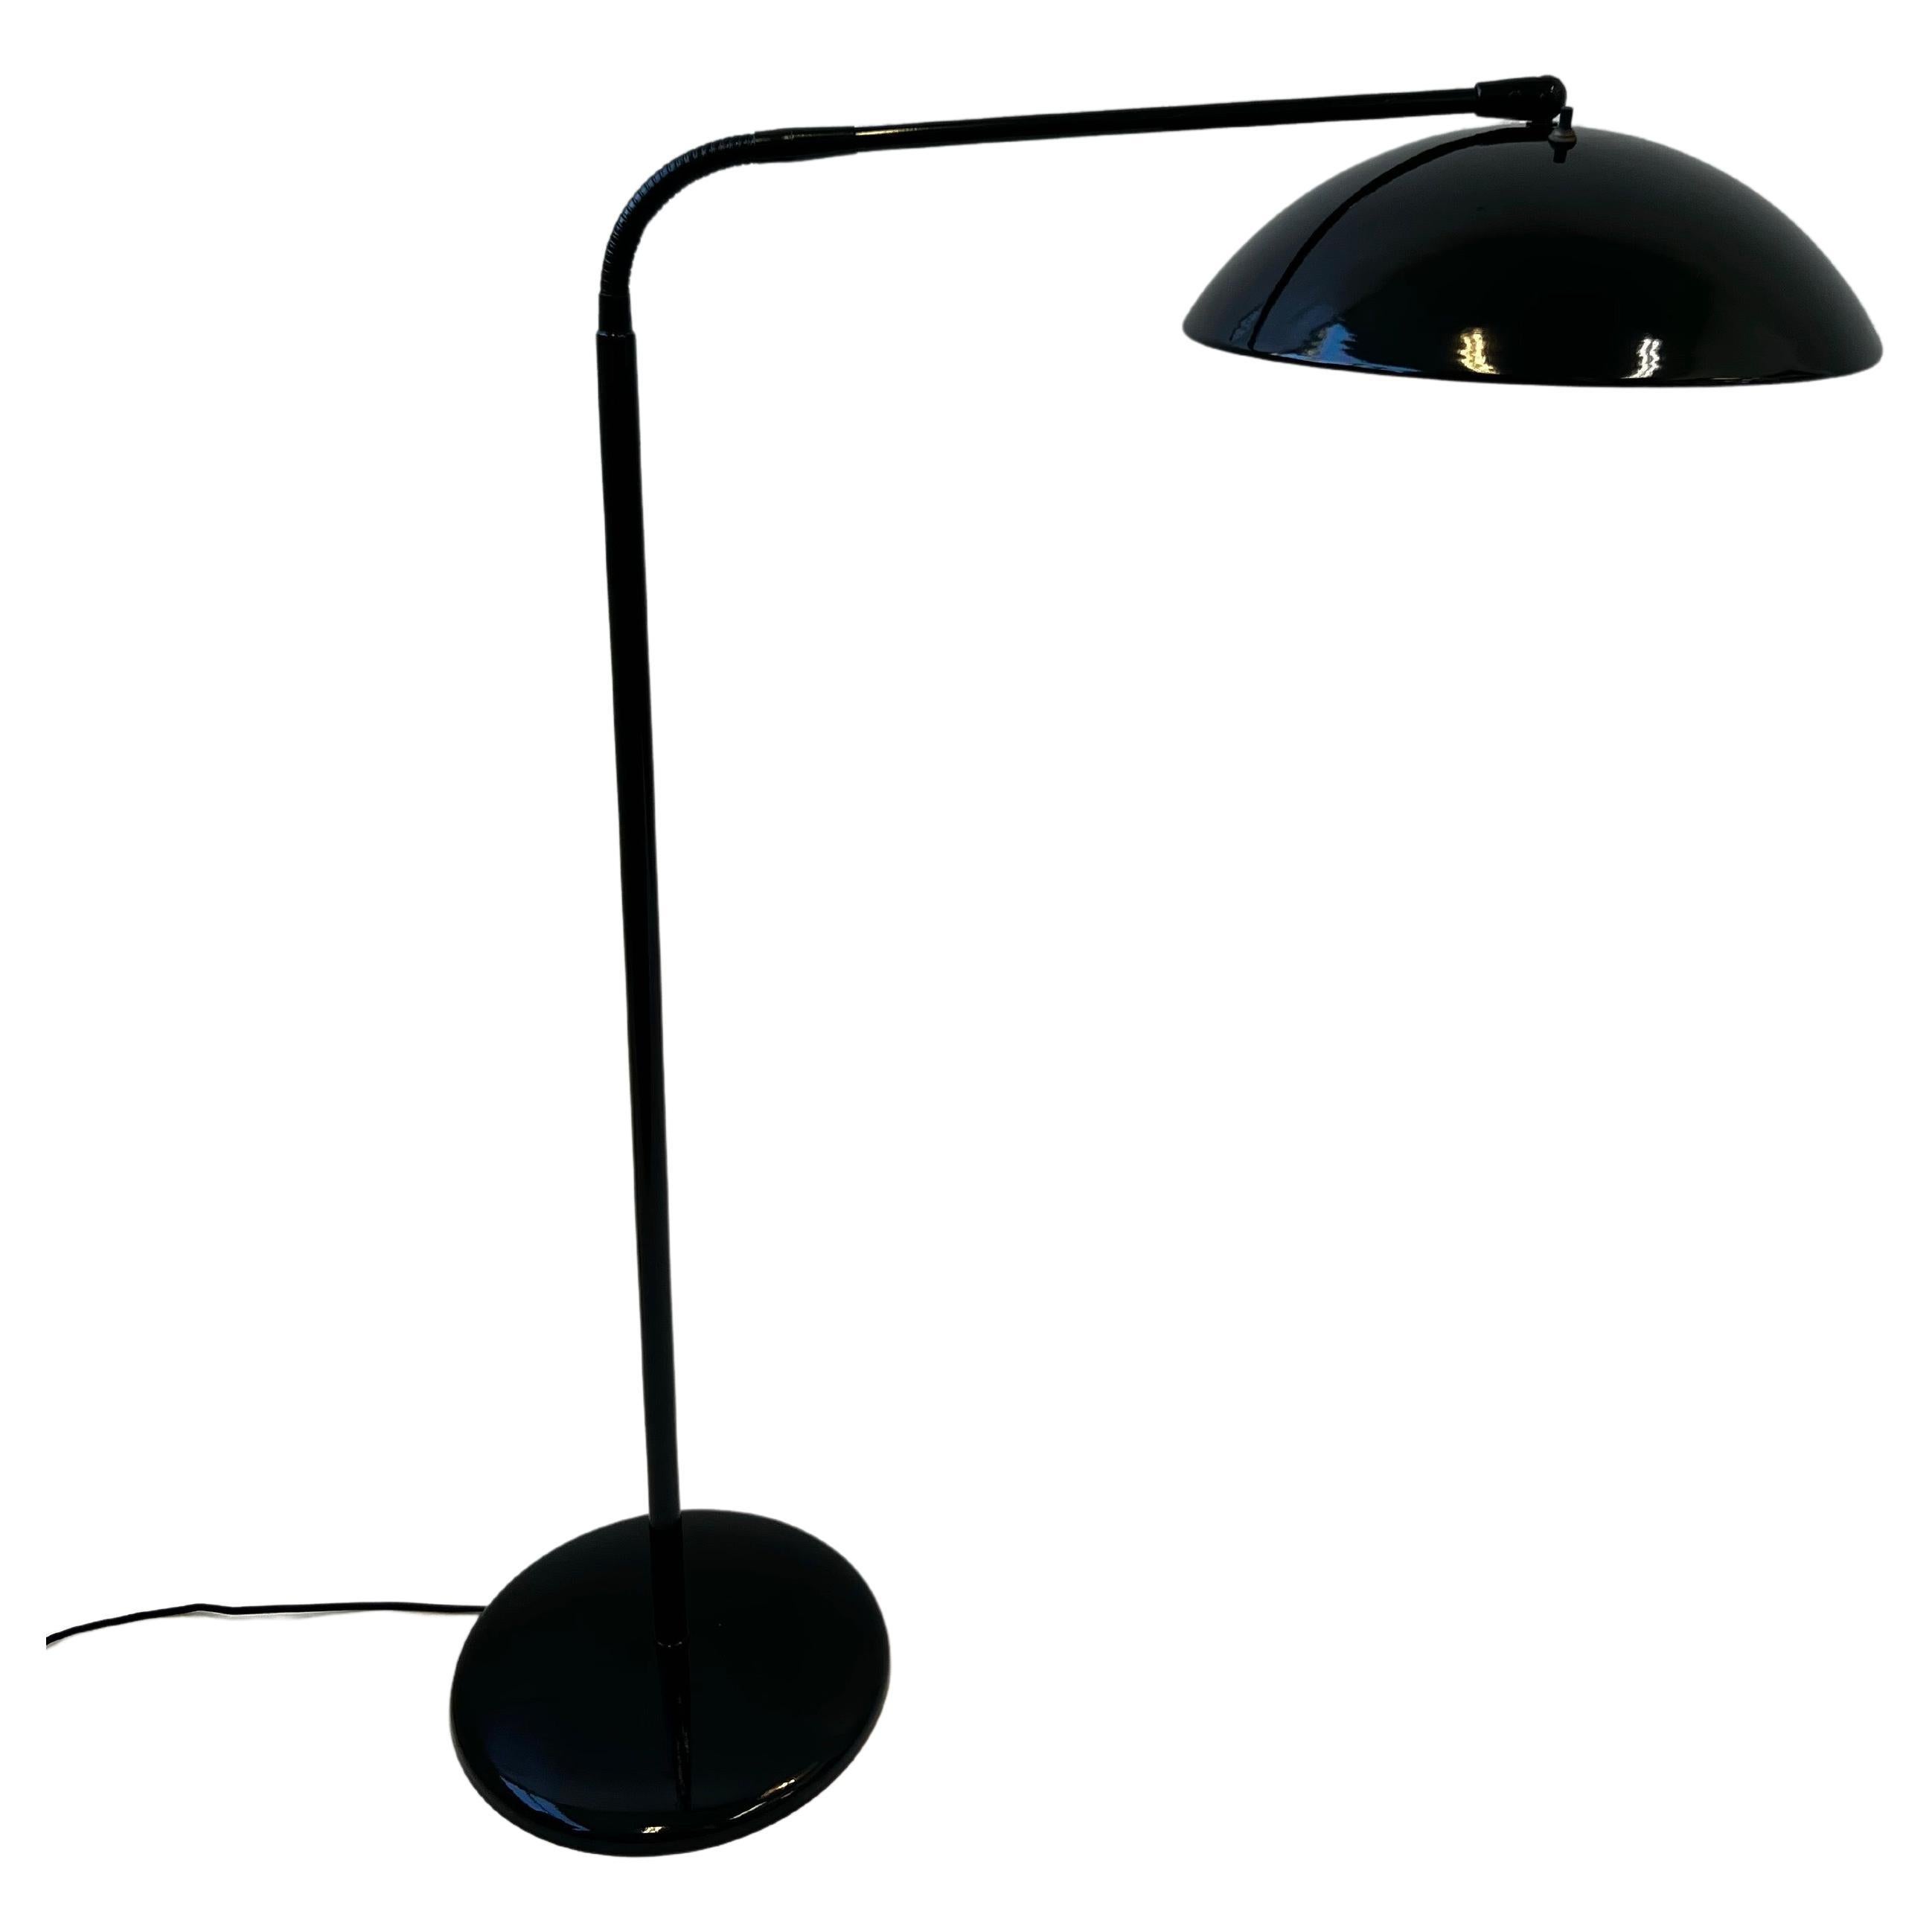 Black powder coated gooseneck floor lamp by Gerald Thurston for Lightolier. 
Newly rewired and powder coated black. 
It takes two 75w Max Edison light bulbs. 

Measurements: 
40.75” High when bend down, 64” High when straight up. Shade is 14.25”